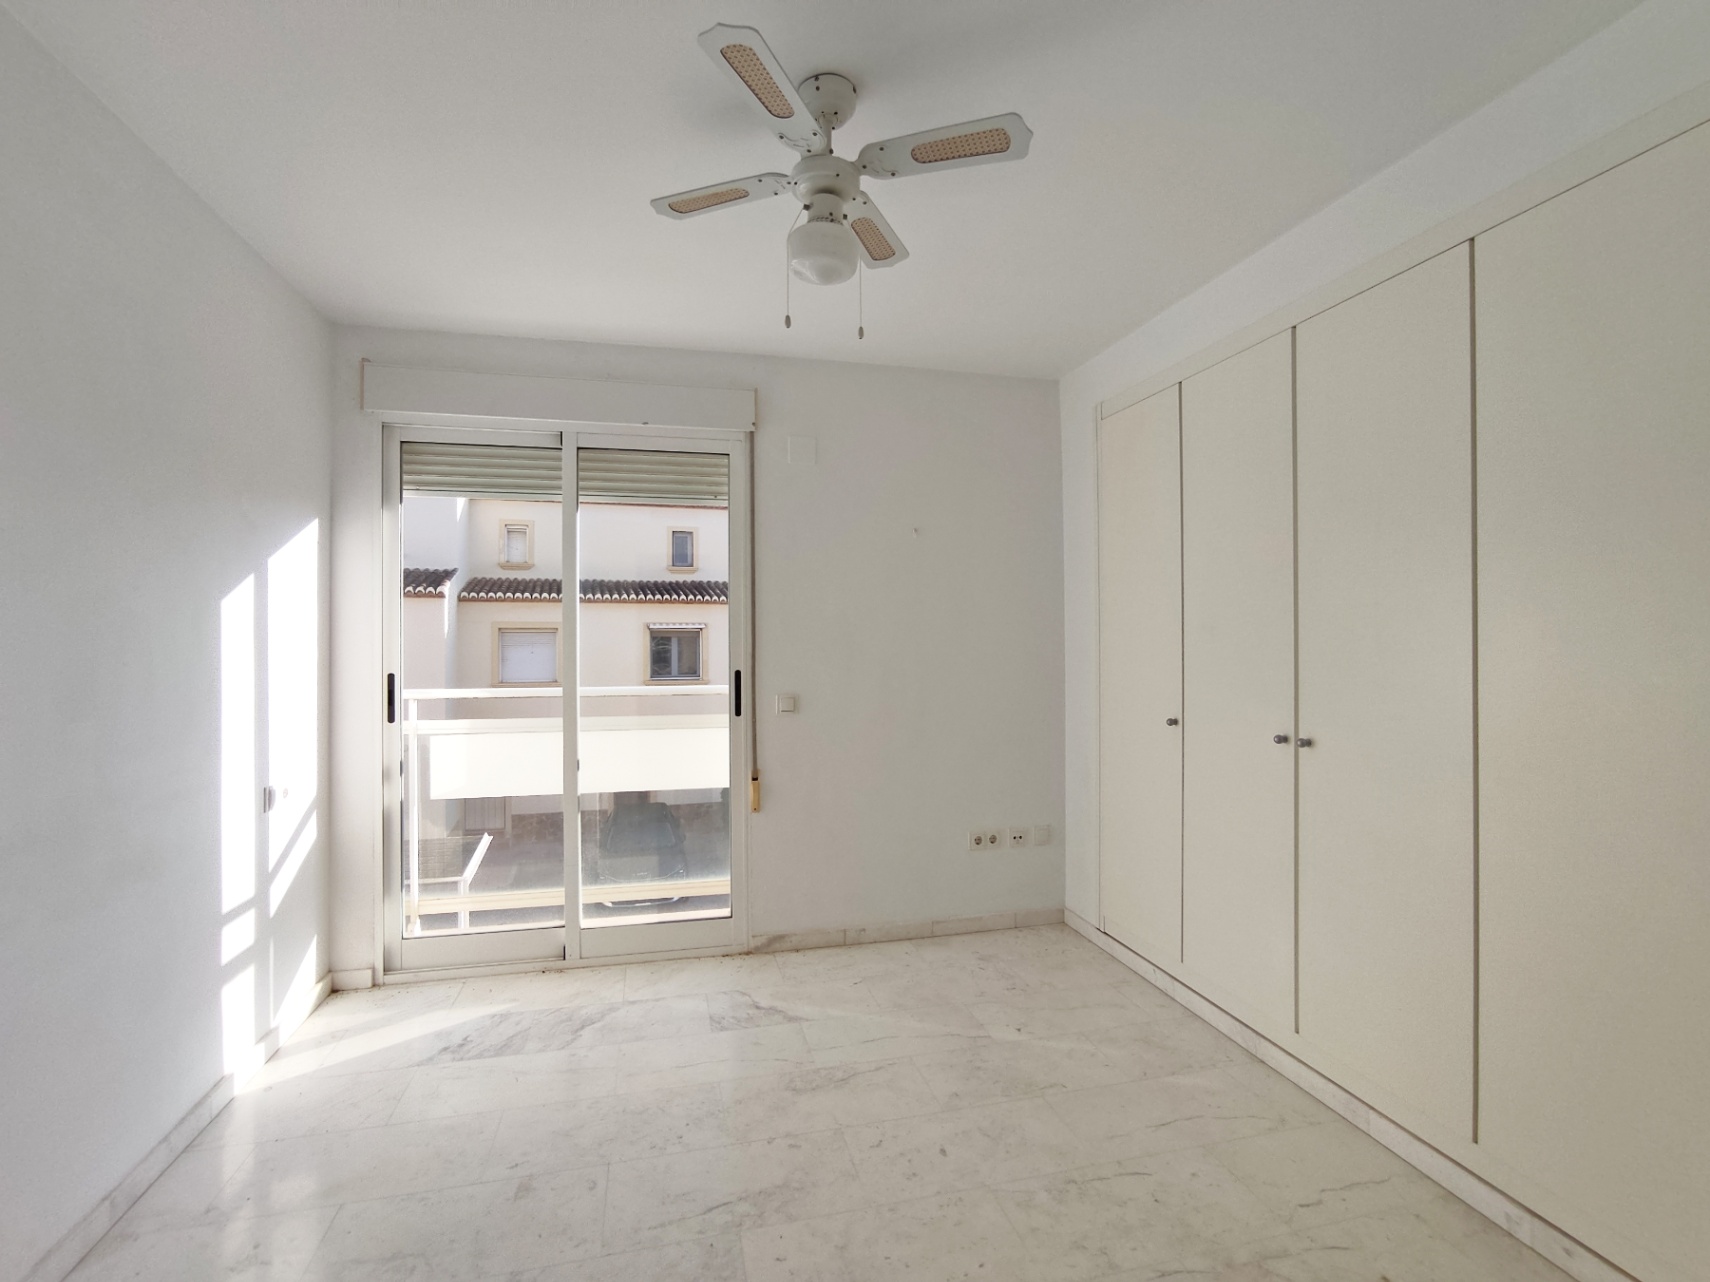 Town House for sale in Xàbia